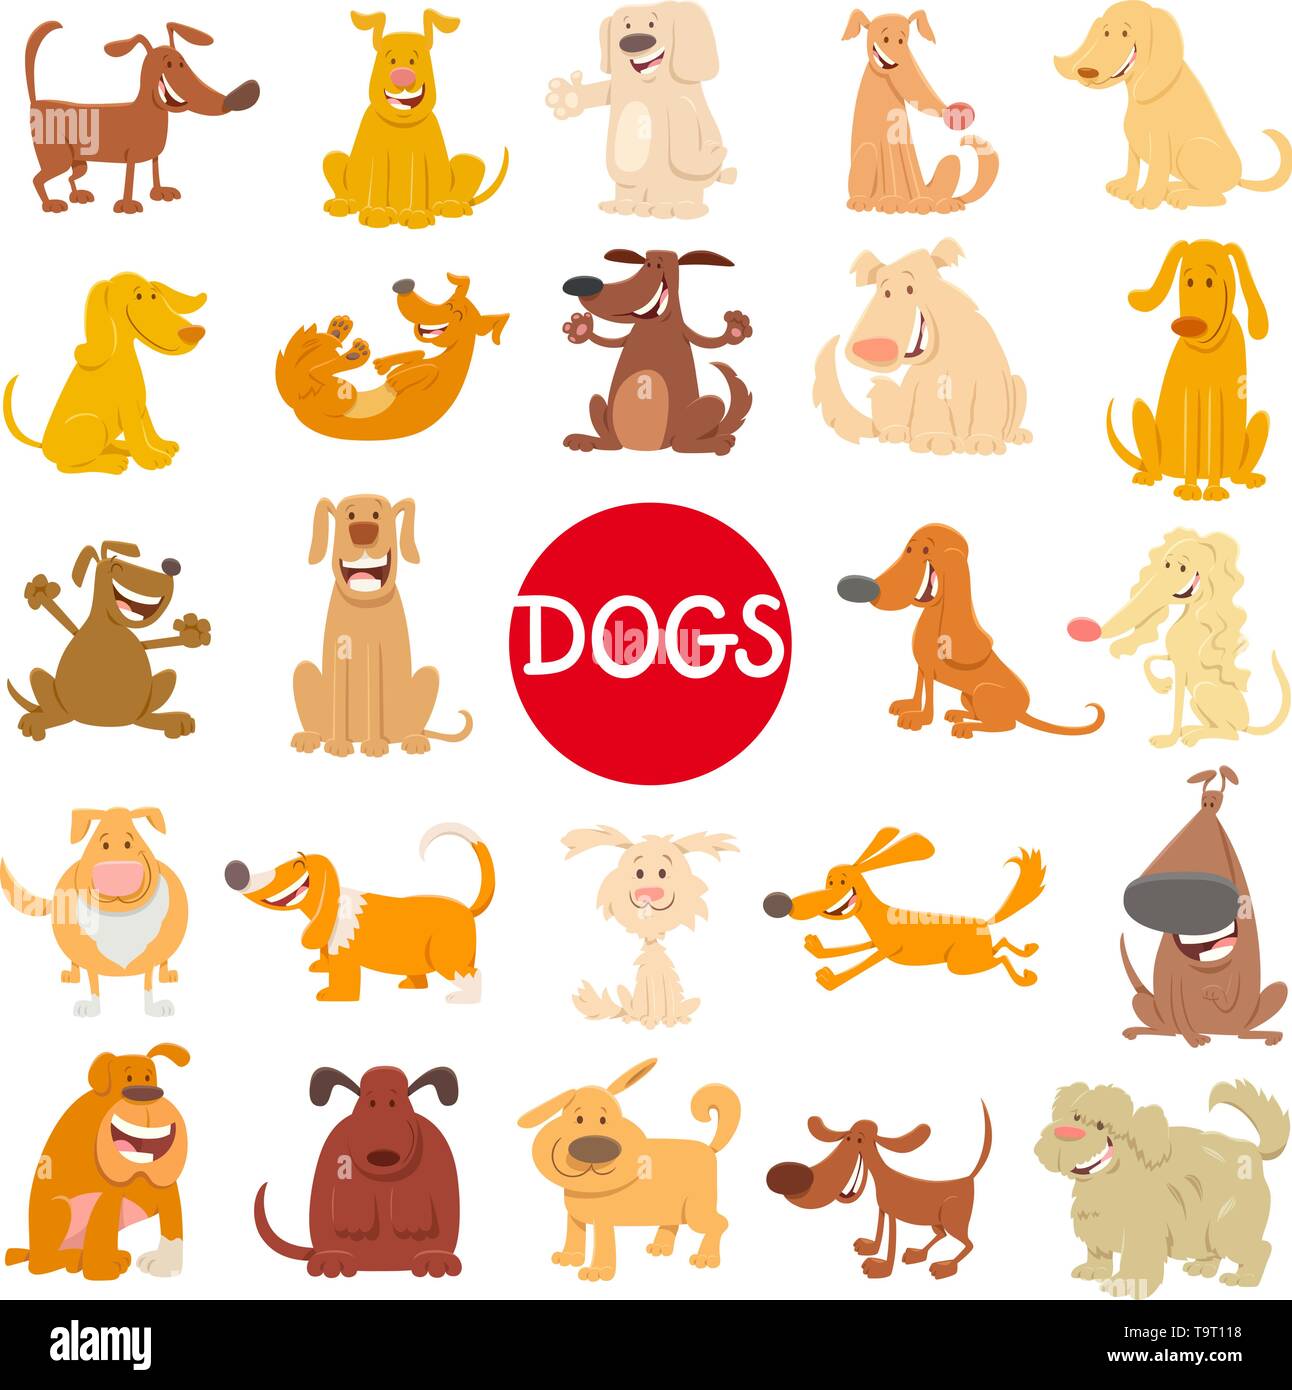 Cartoon Illustration of Funny Dogs and Puppies Pet Animal Characters Large Set Stock Vector